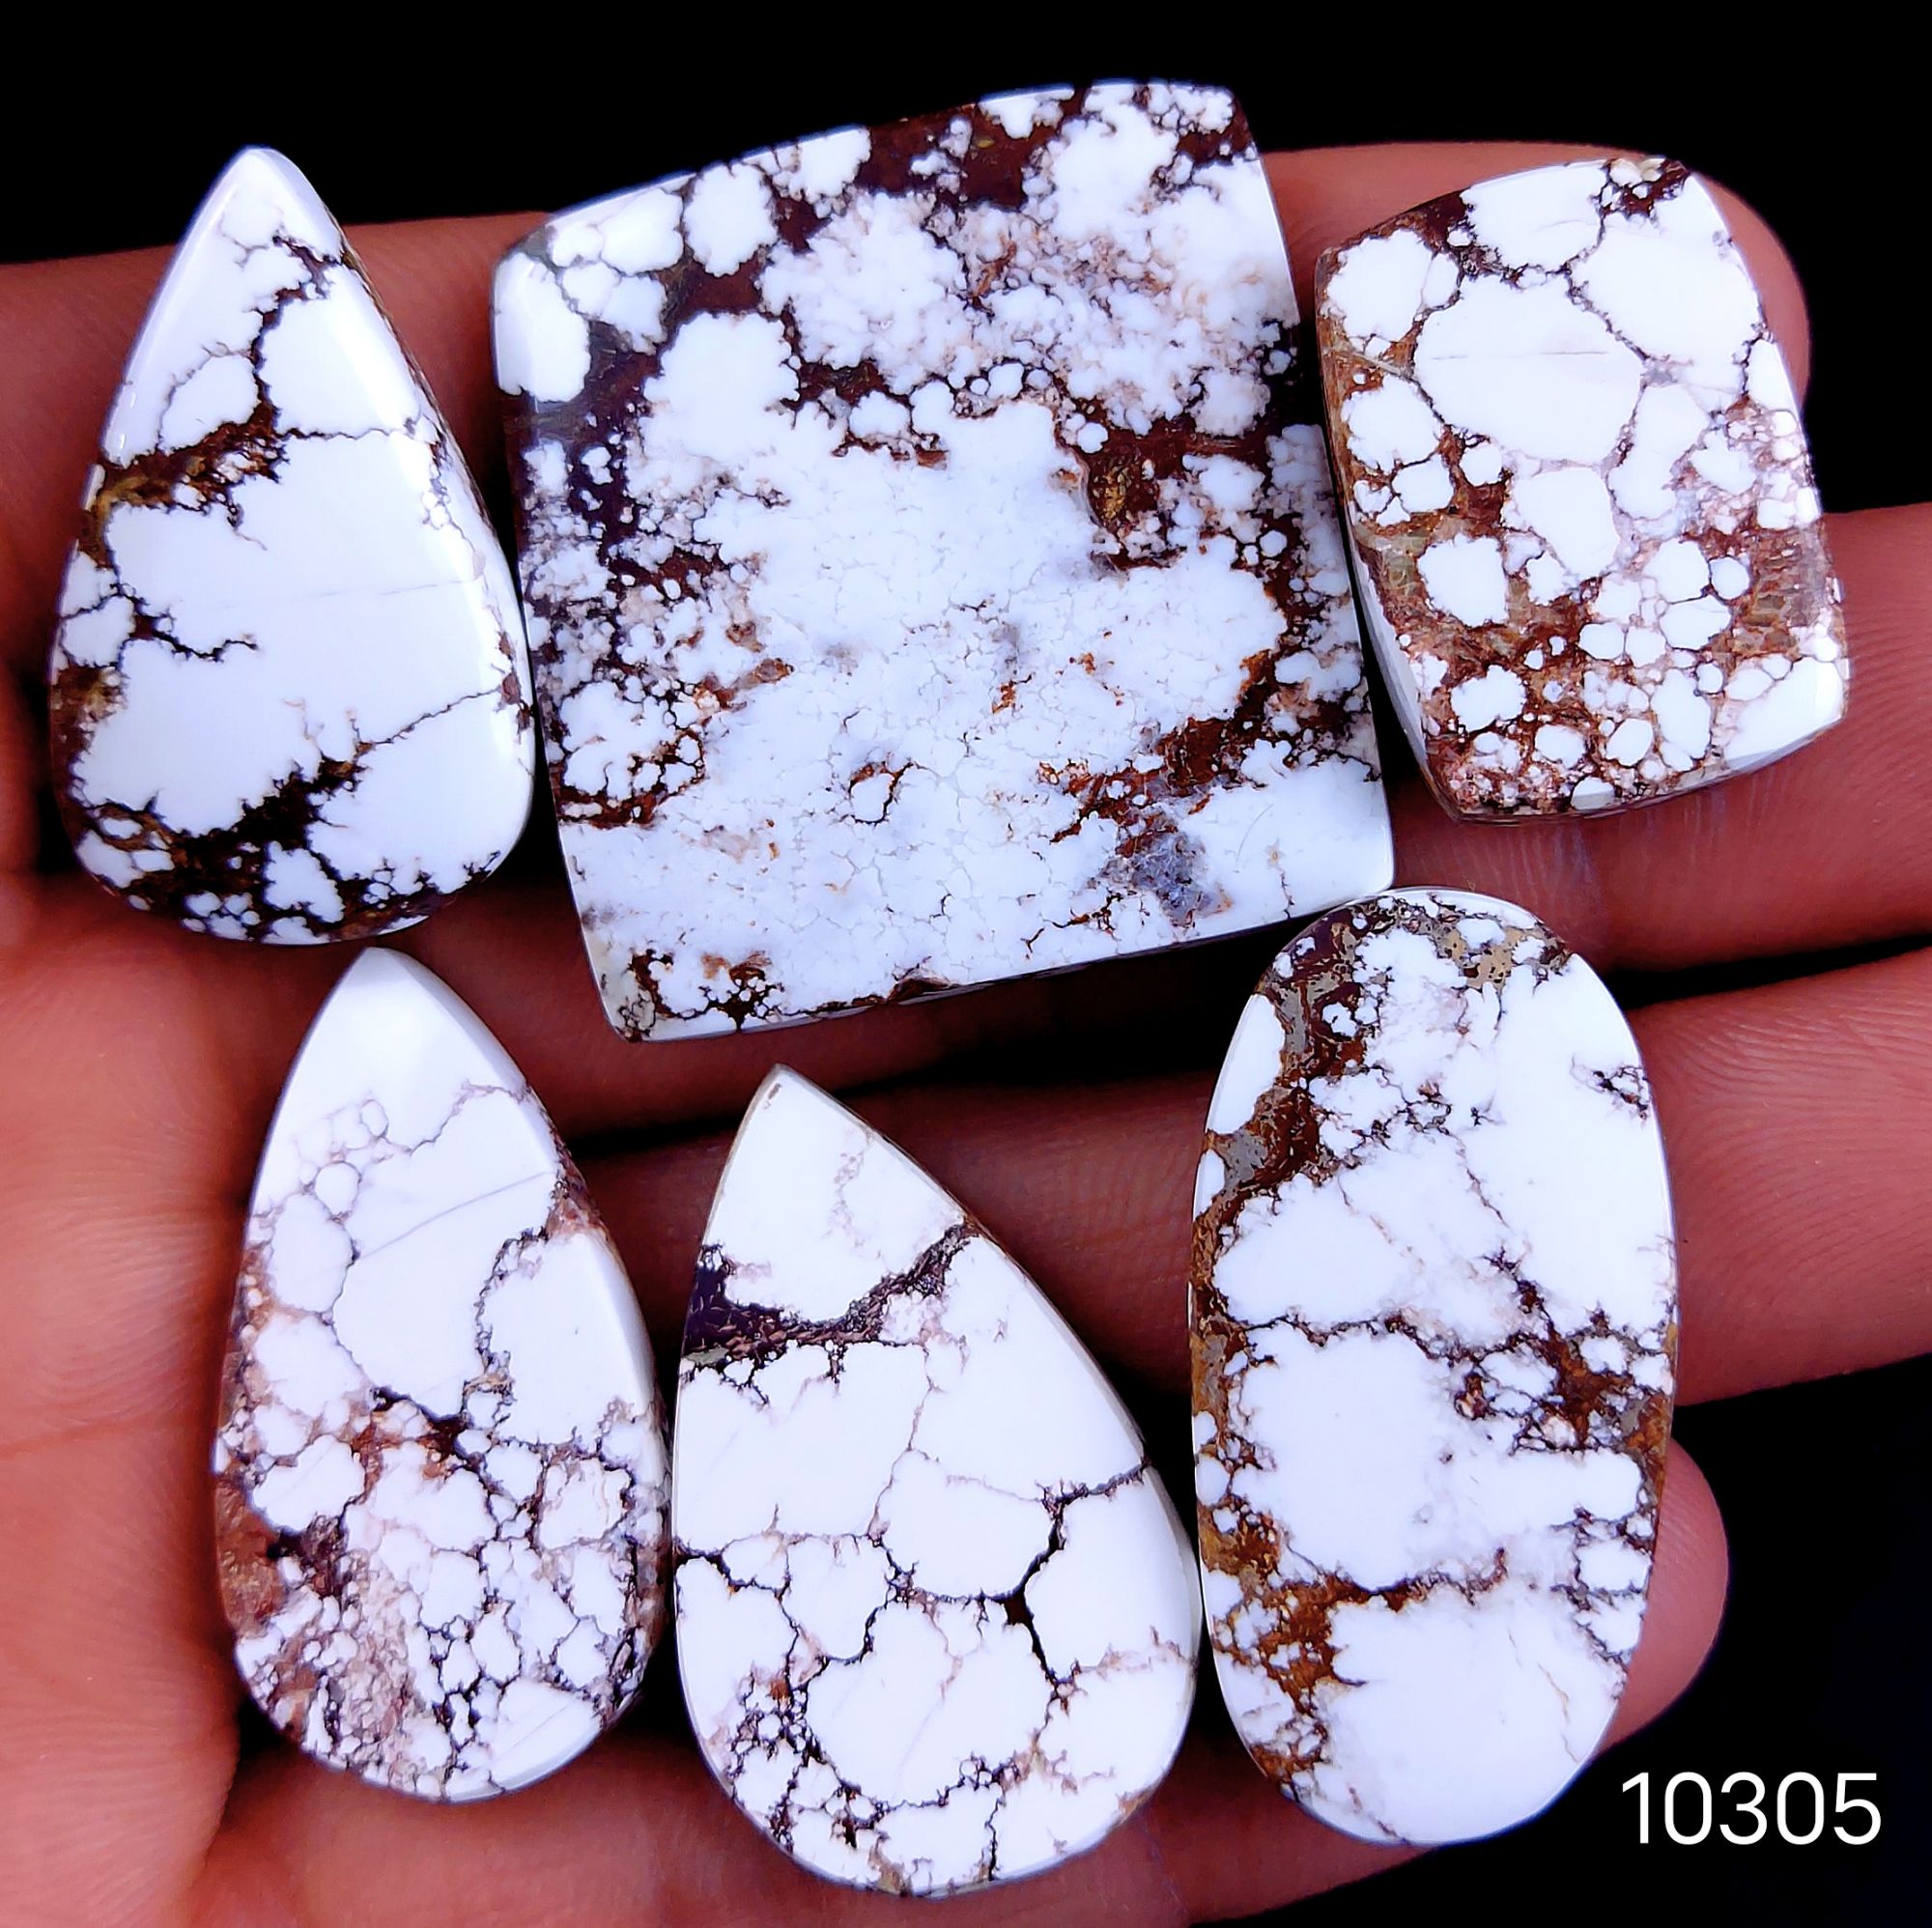 6Pc 200Cts Natural Wild Horse Magnesite Turquoise Cabochon Polished Loose Gemstone Flat Back Multi Jewelry Making Crystal  35x32 24x17mm #10305